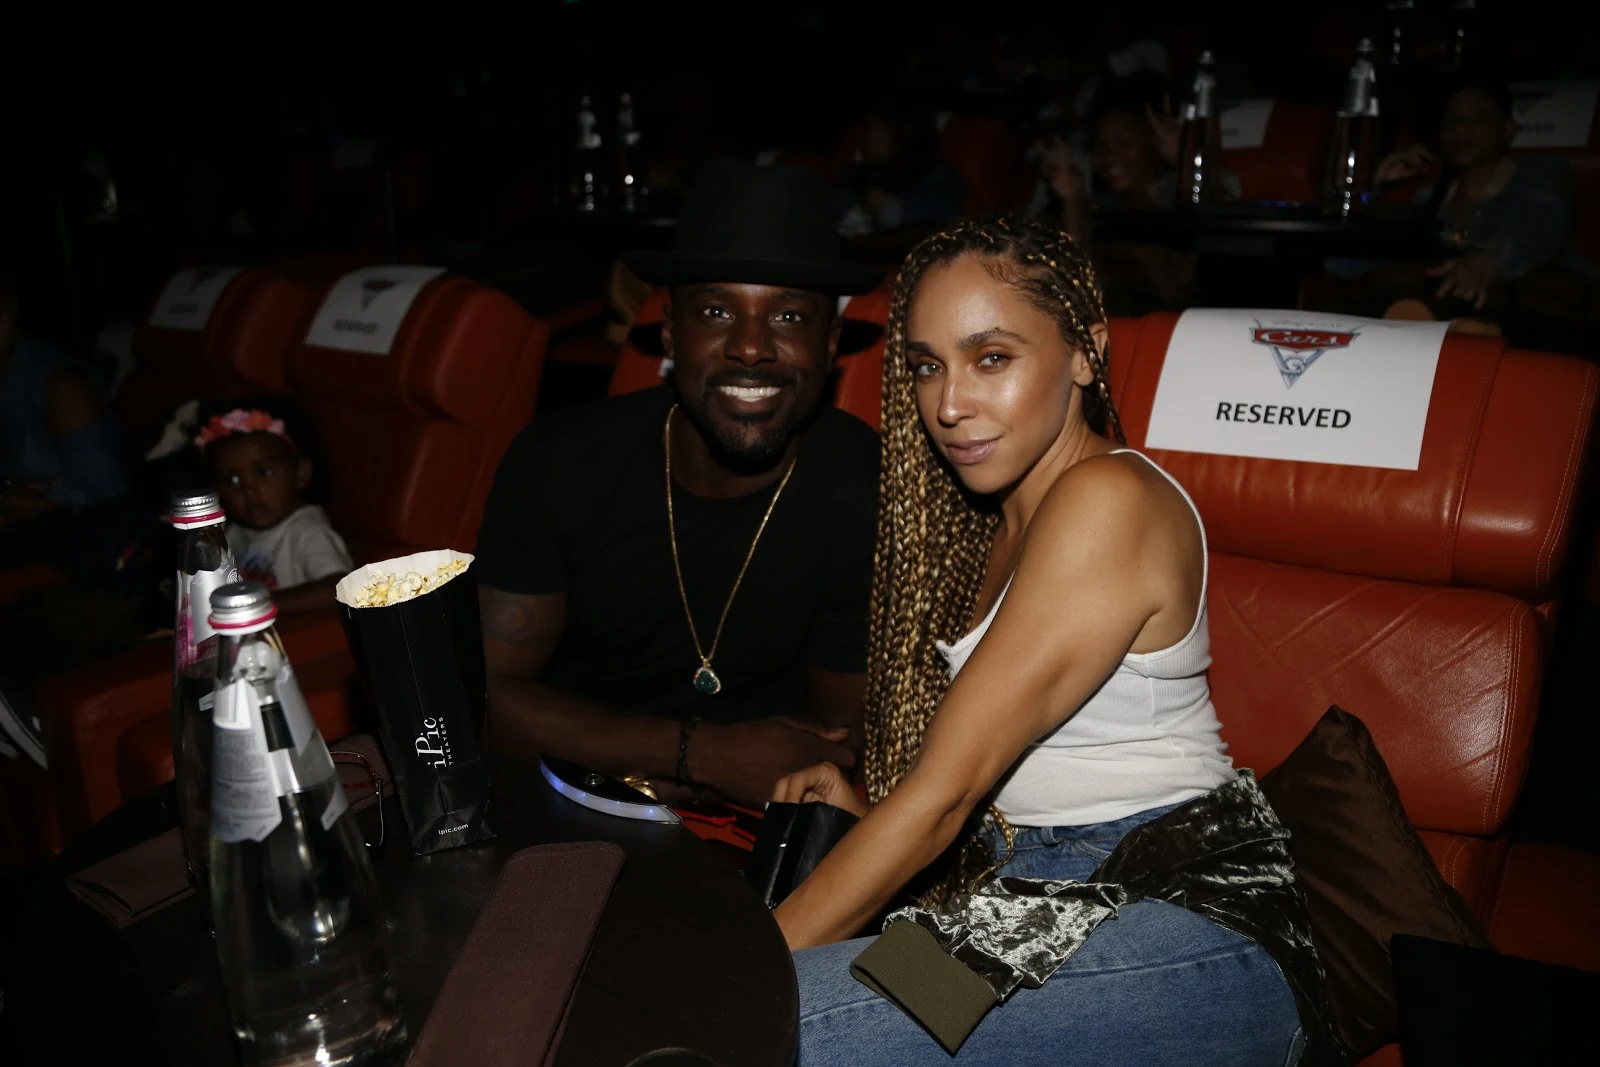 Lance Gross host CARS 3 special VIP Screening: Movie Review  via  www.productreviewmom.com